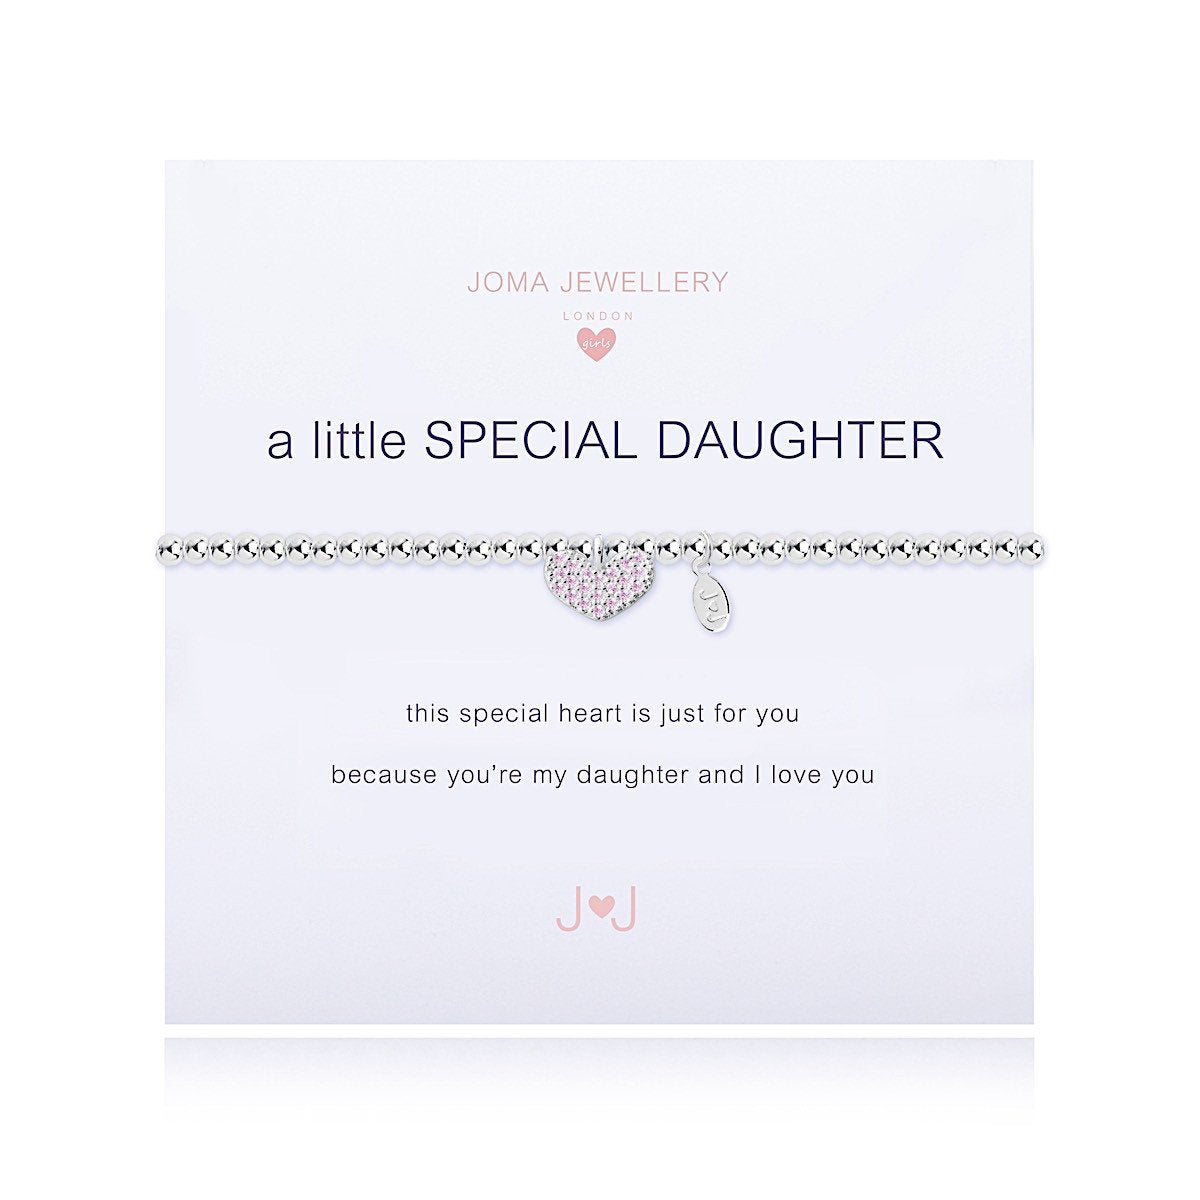 Joma Girls a little Special Daughter Bracelet - More Than Just a Gift